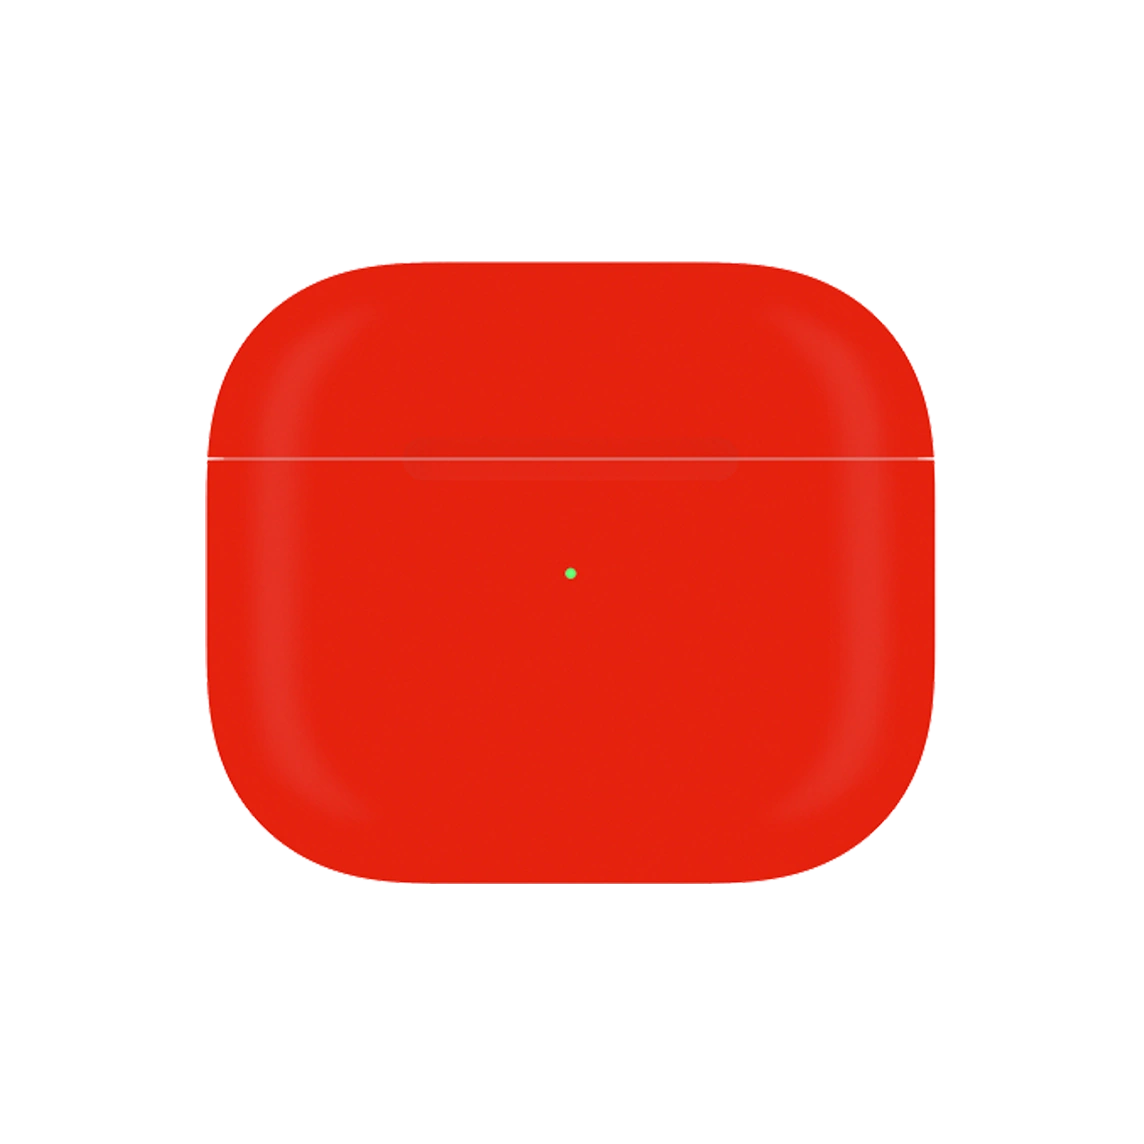 Switch Painted Apple Airpods 3 Ferrari Red Matte